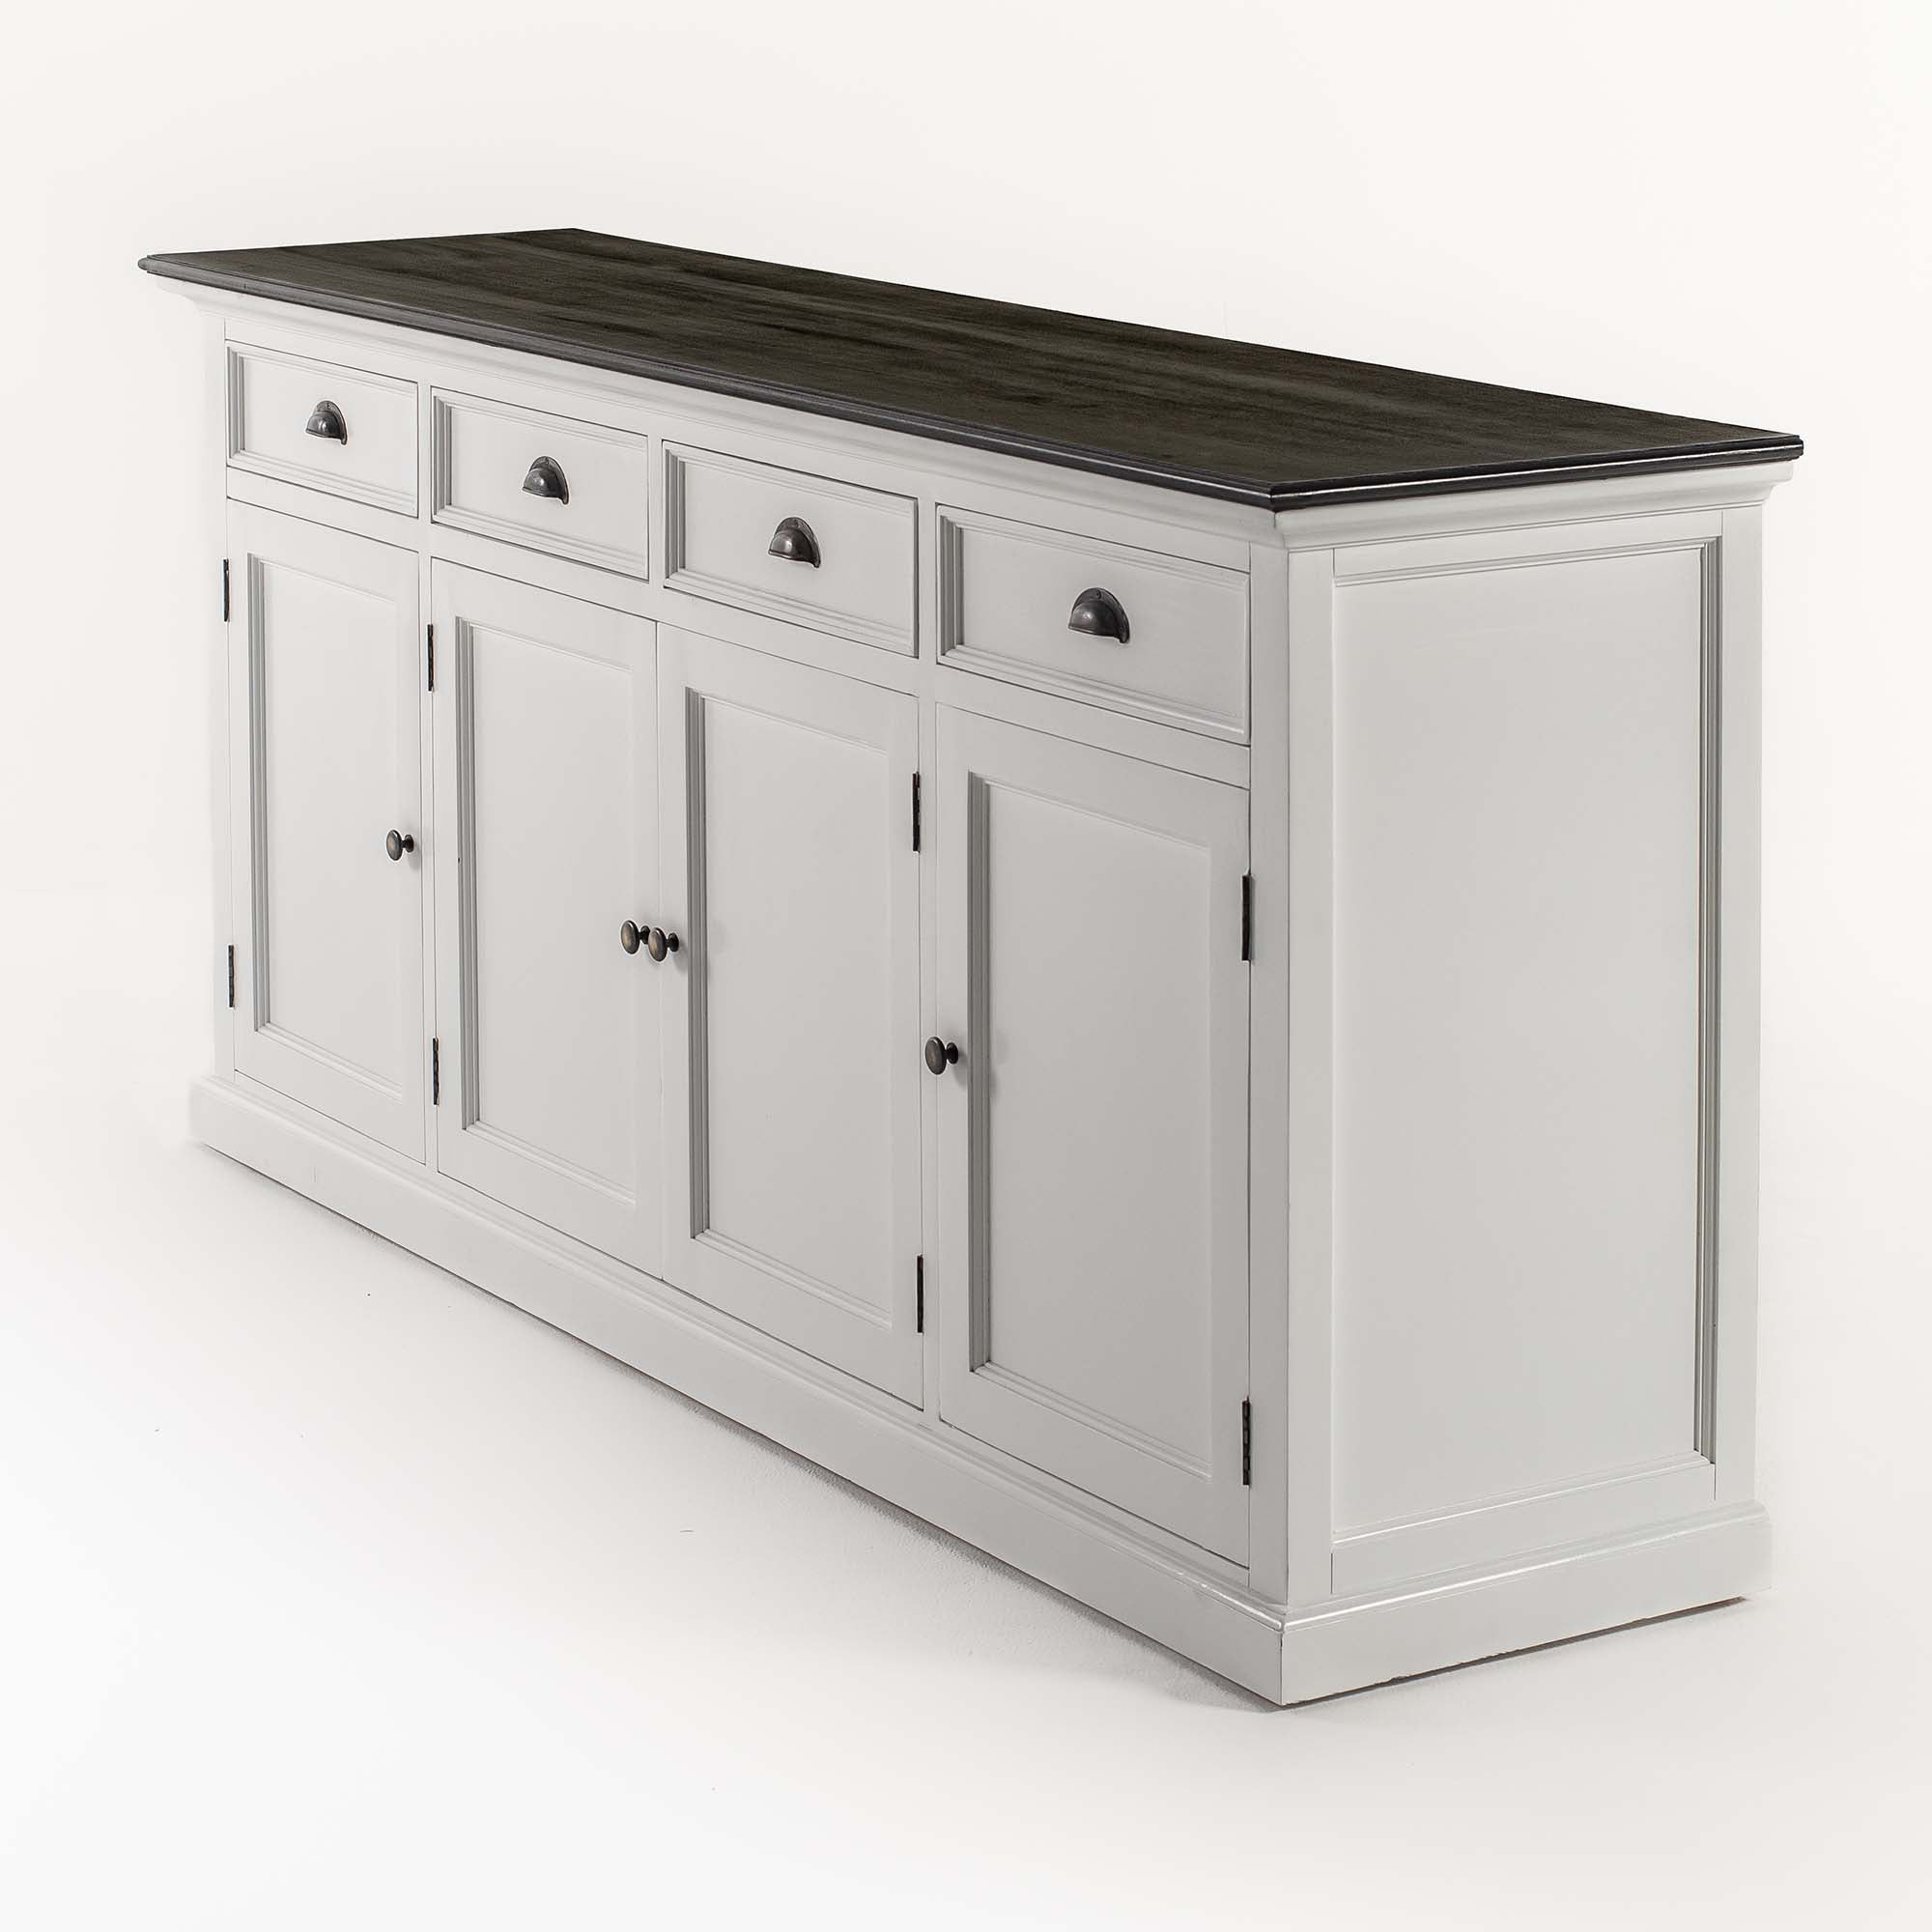 Halifax Contrast Farmhouse White & Black Buffet with 4 Doors 4 Drawers